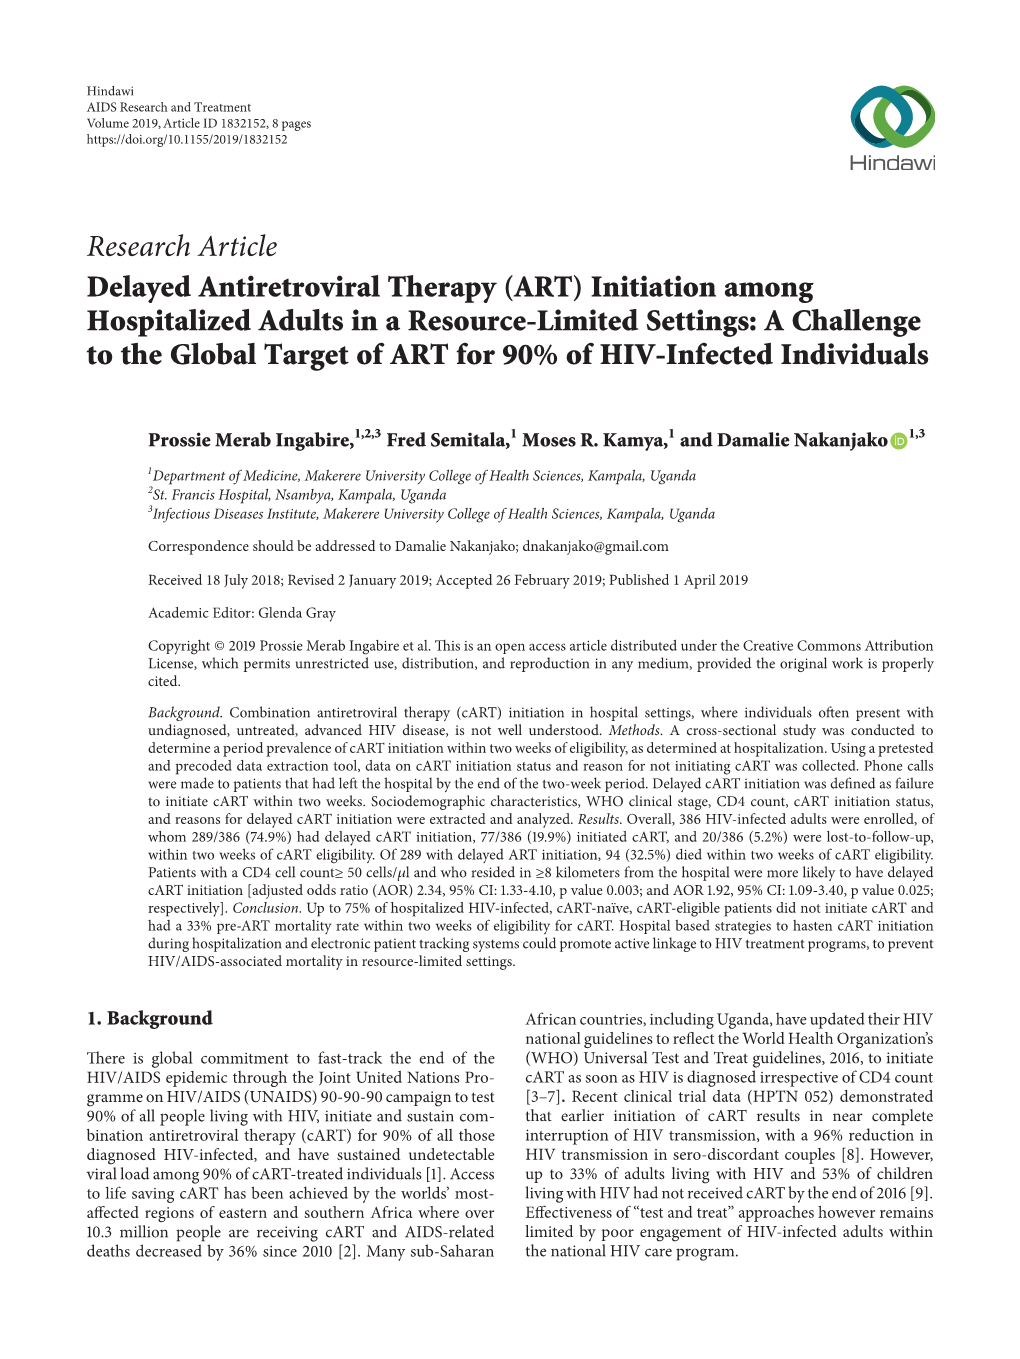 Initiation Among Hospitalized Adults in a Resource-Limited Settings: a Challenge to the Global Target of ART for 90% of HIV-Infected Individuals